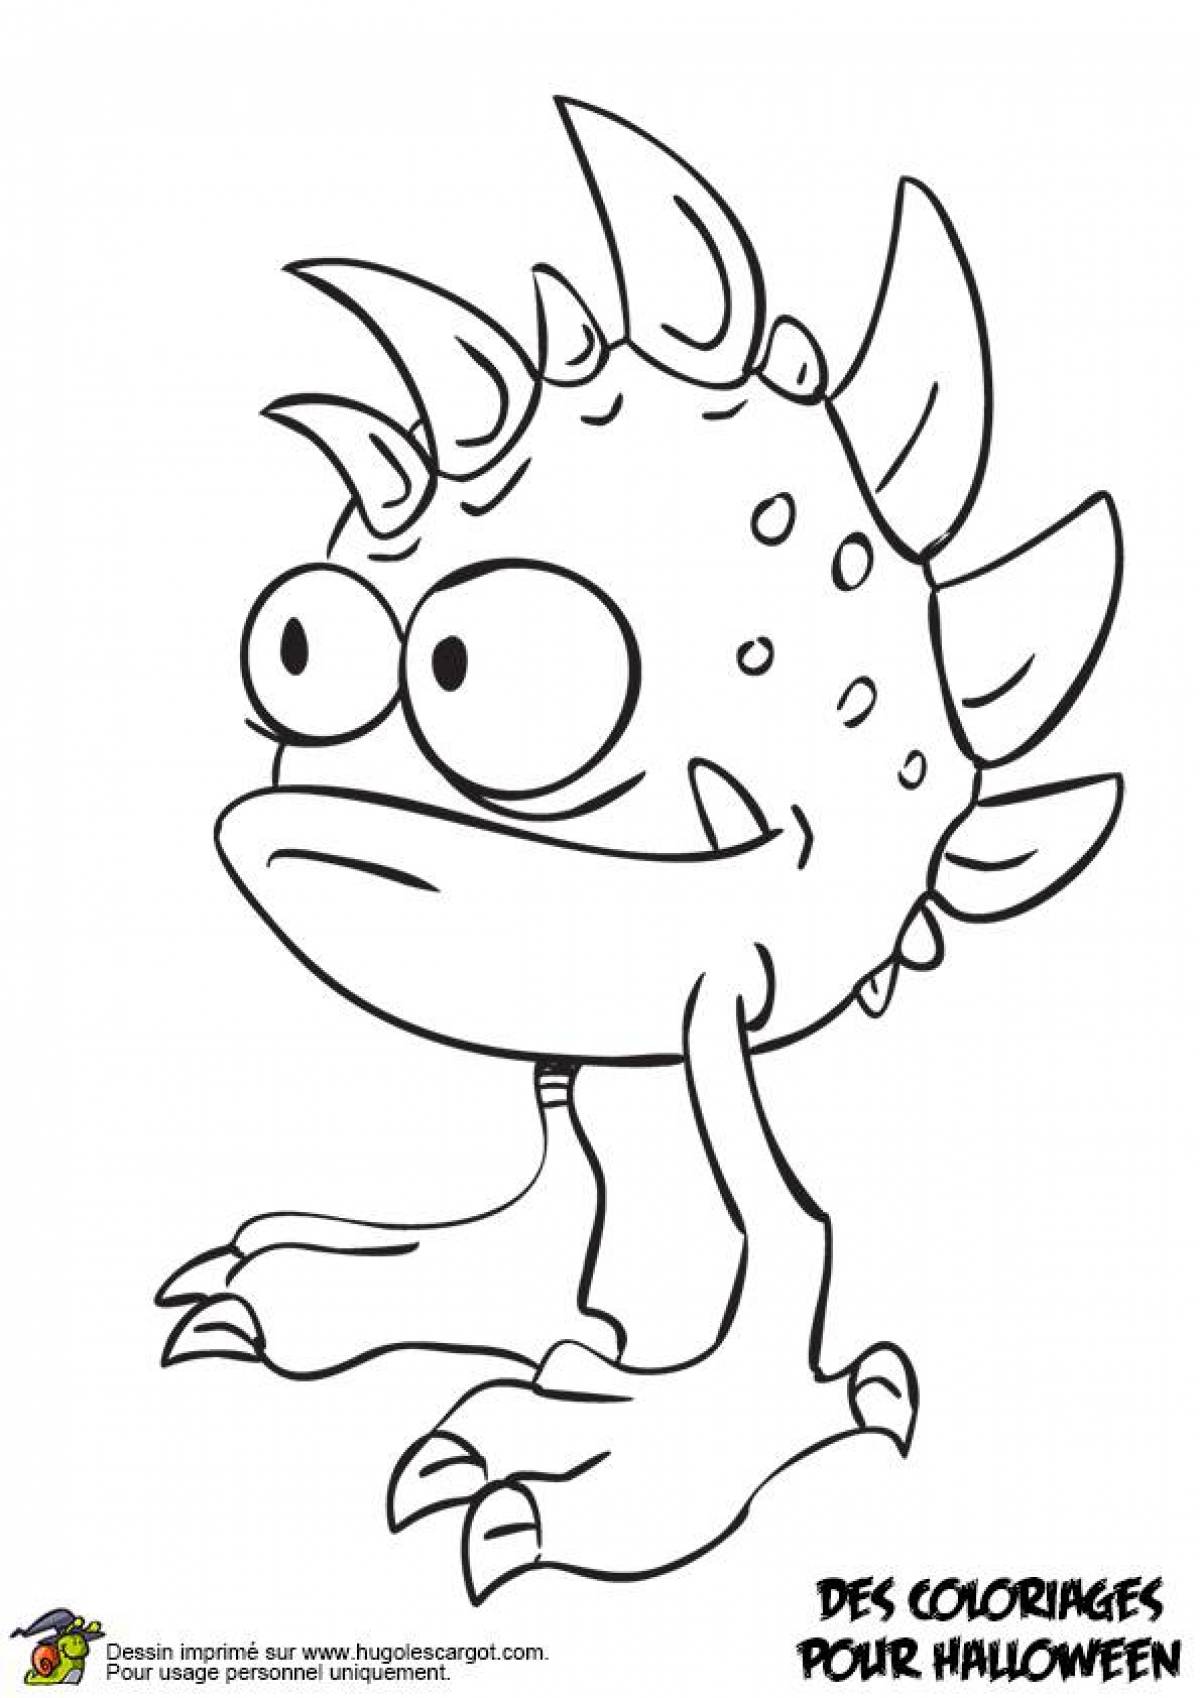 Vile monsters coloring pages